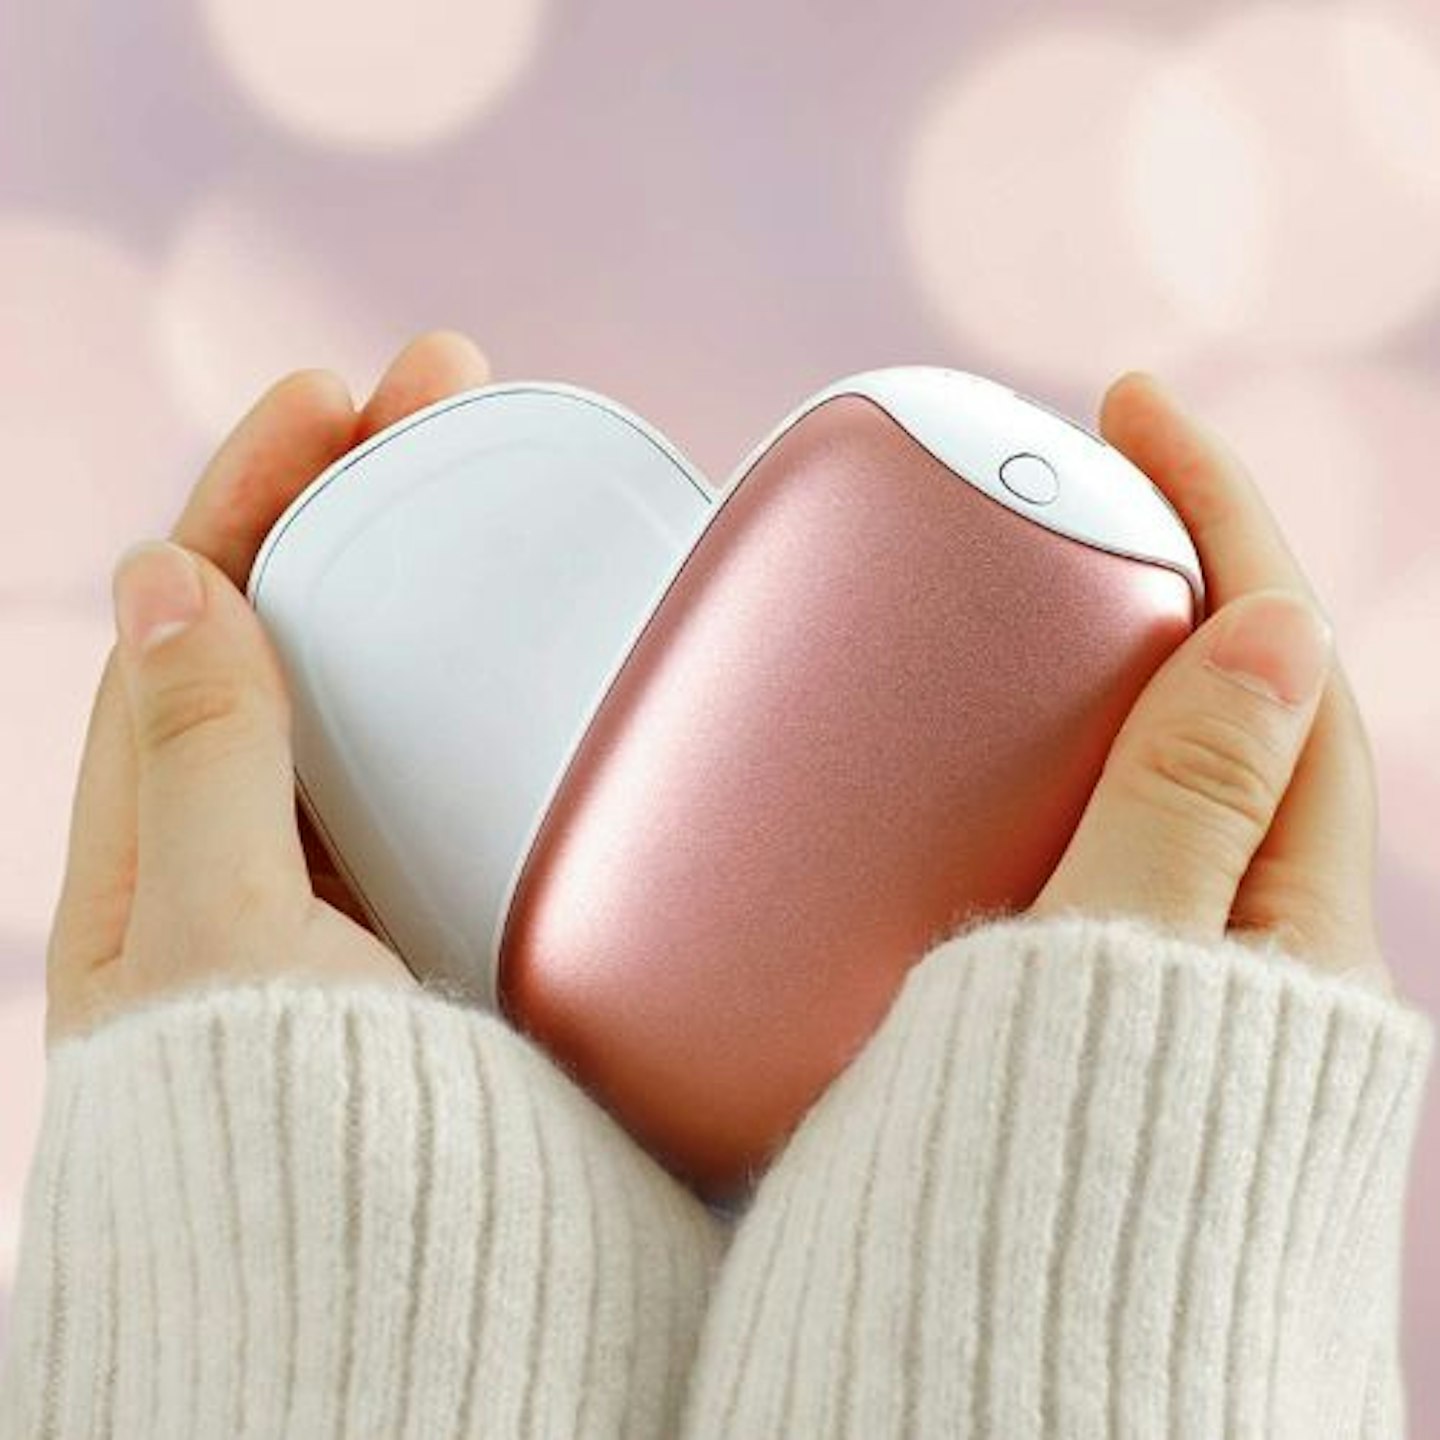 The 8 Best Rechargeable Hand Warmers of 2024, Tested and Reviewed